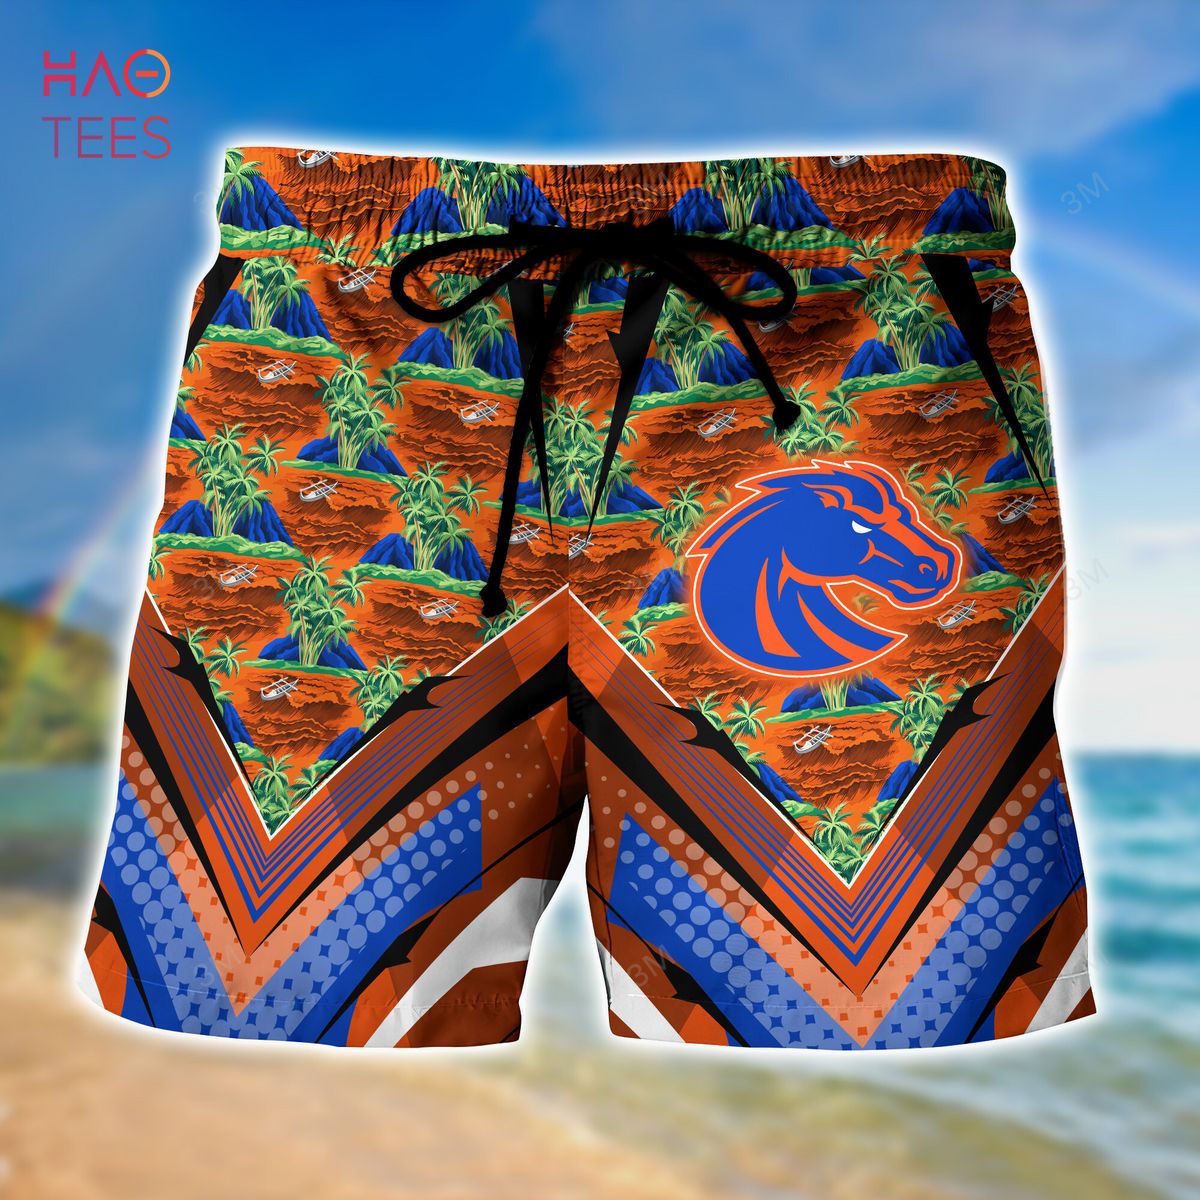 TRENDING] Boise State Broncos Summer Hawaiian Shirt And Shorts, For Sports  Fans This Season